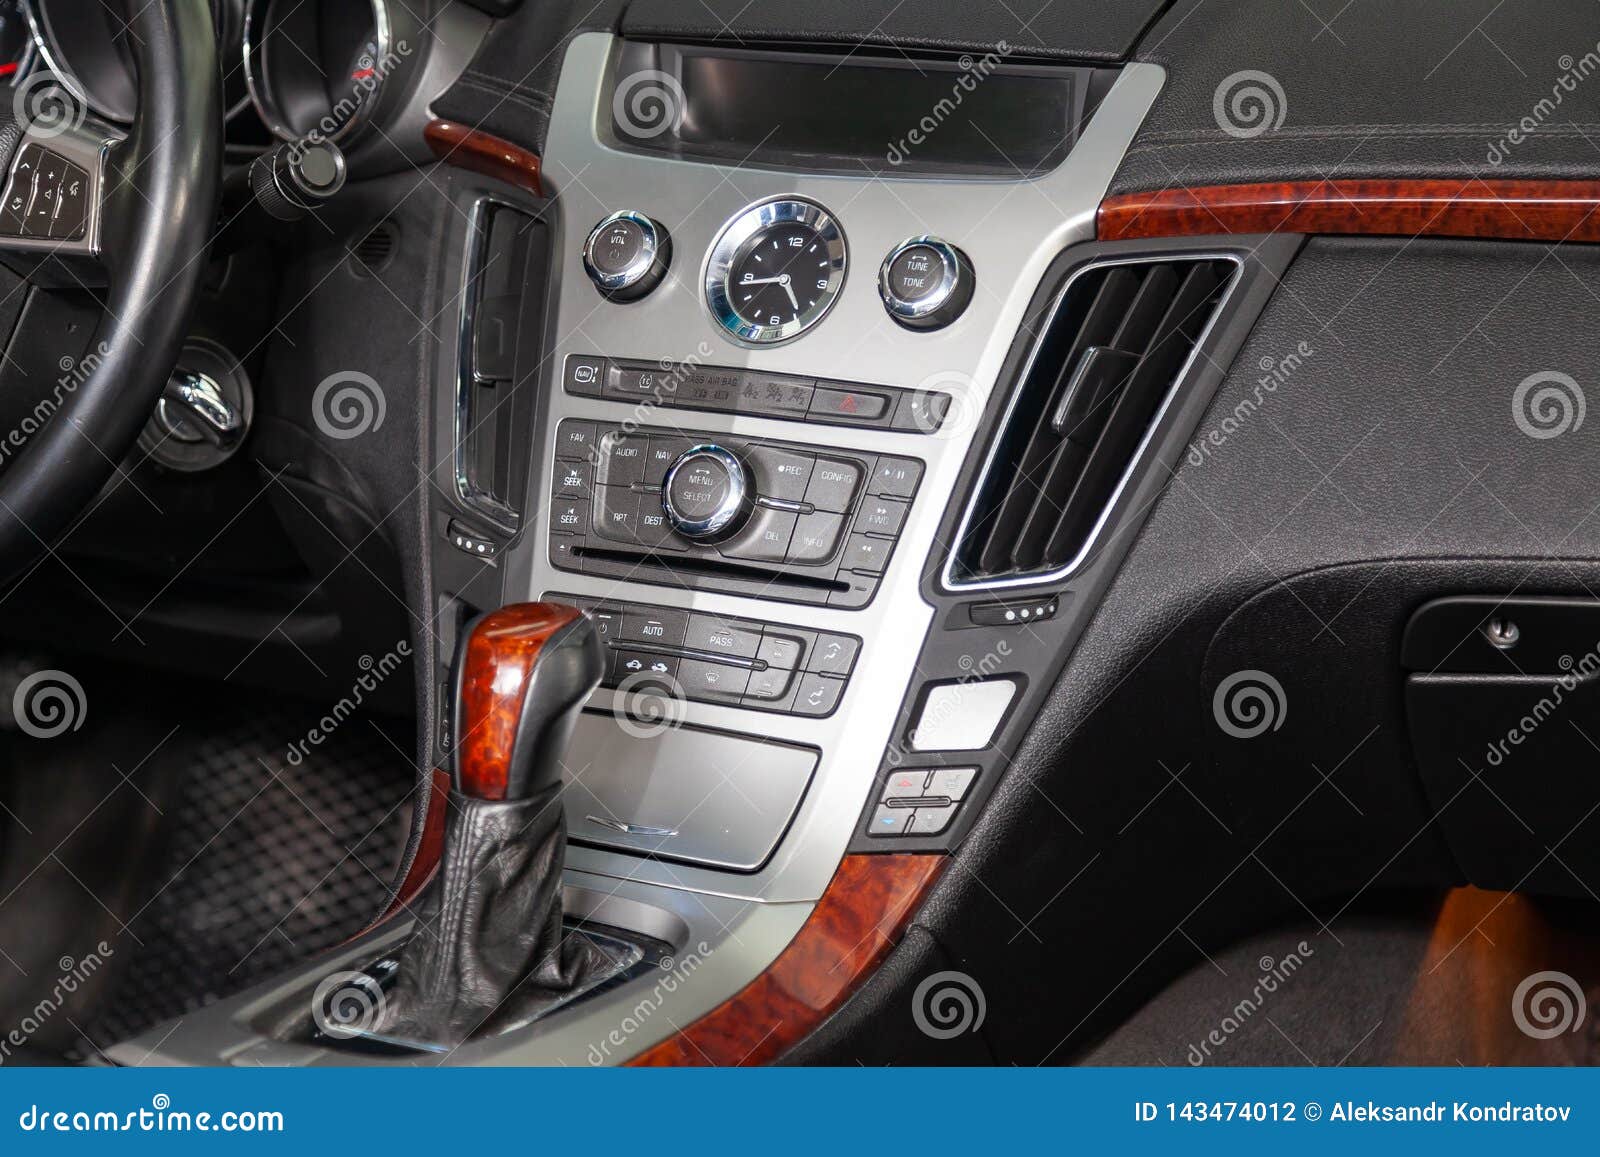 View To The Interior Of Cadillac Cts With Dashboard Clock